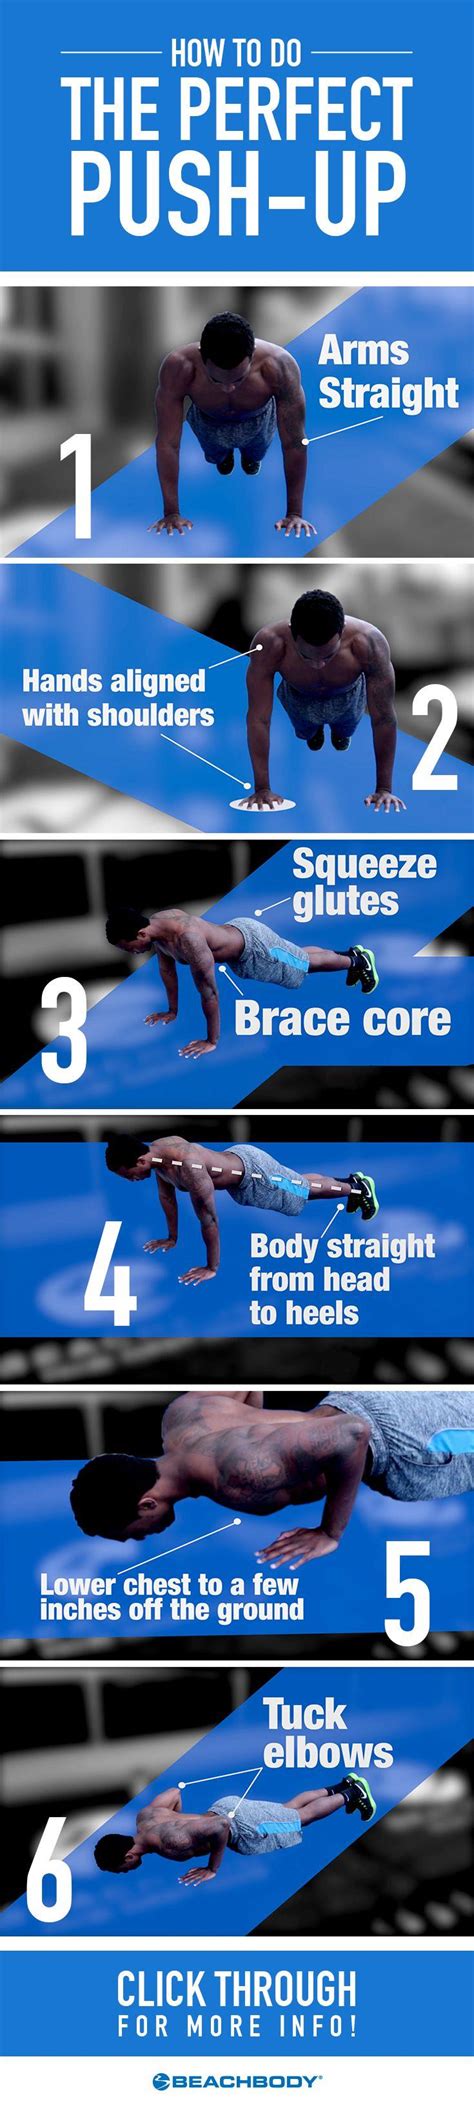 This Guide Shows You How To Perform Push Ups Correctly To Maximize